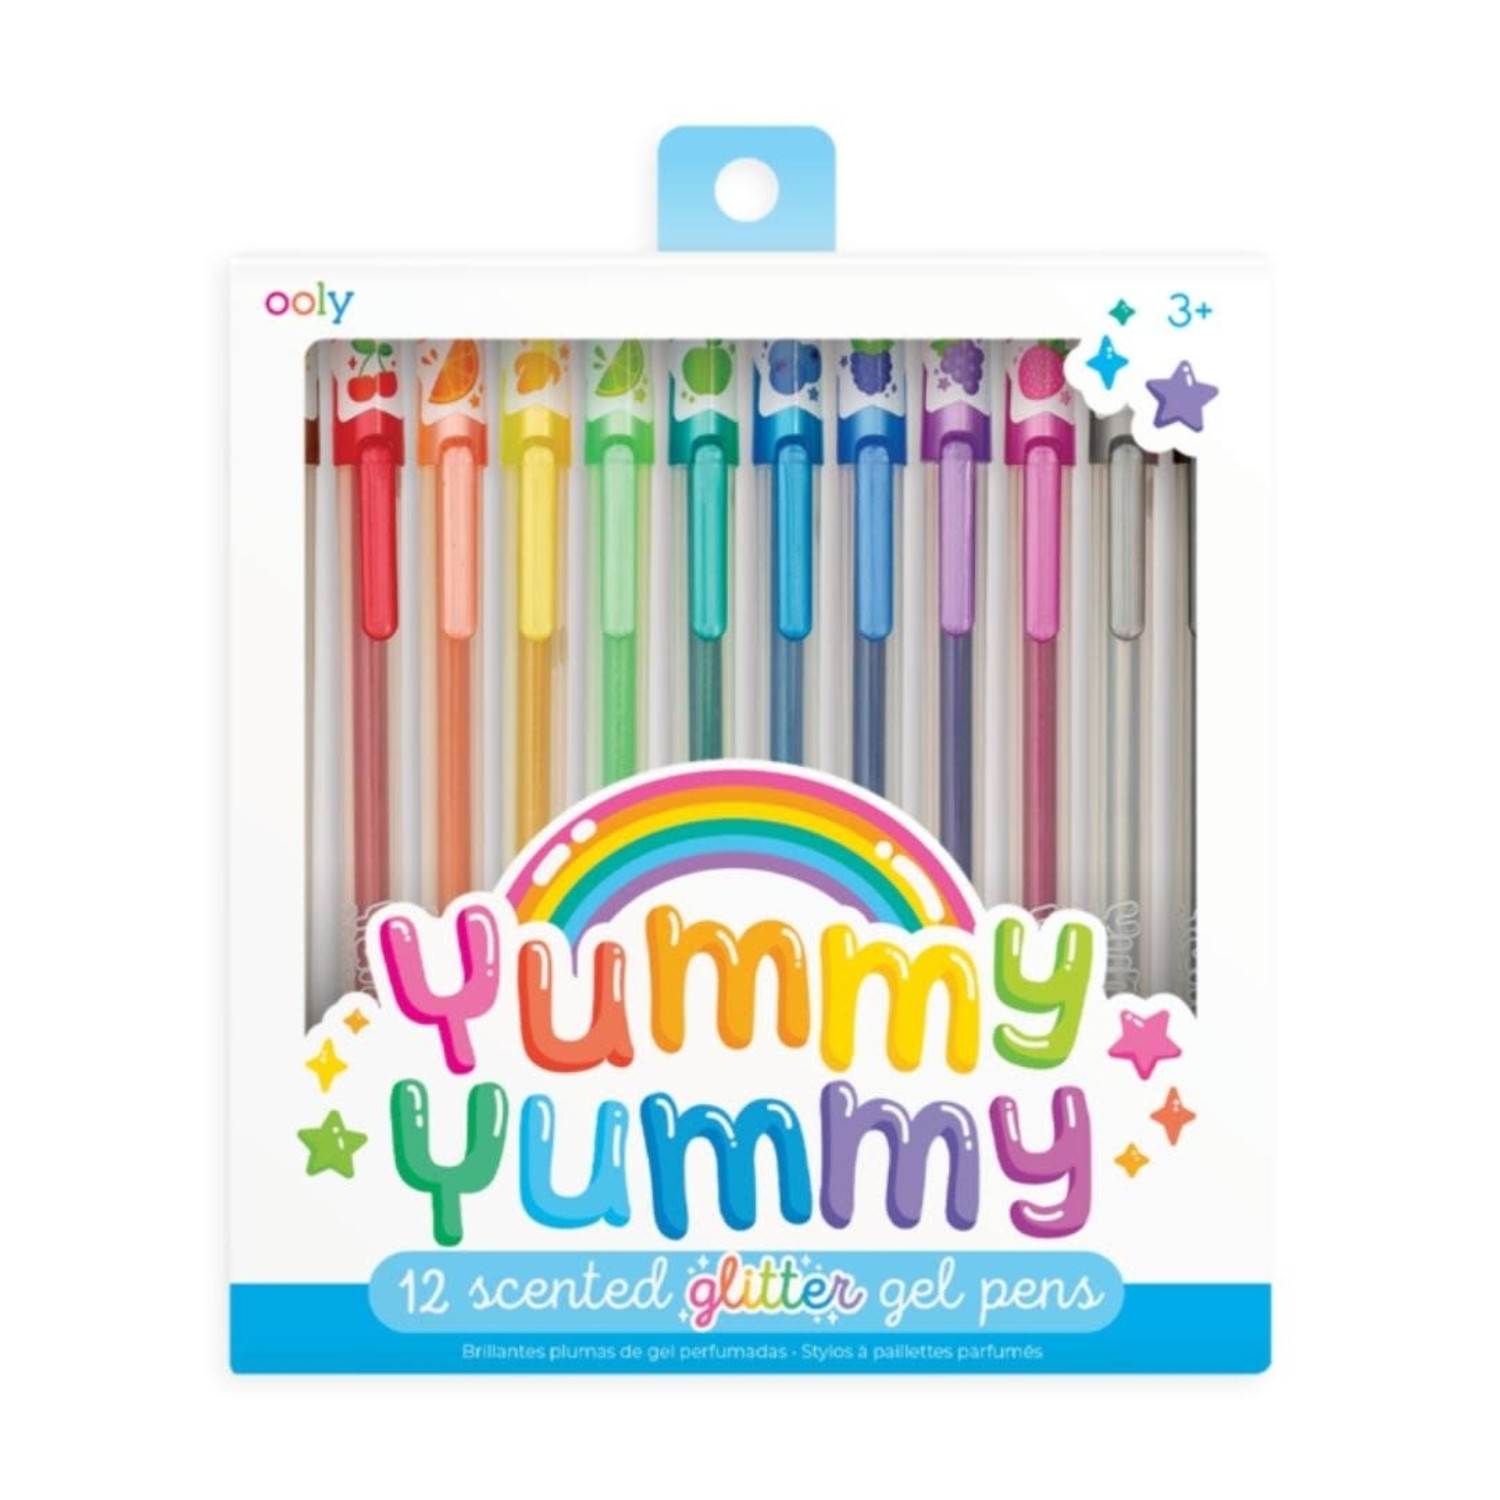 https://cdn.shoplightspeed.com/shops/653480/files/39543348/1500x4000x3/ooly-yummy-yummy-scented-glitter-pens-from-ooly.jpg